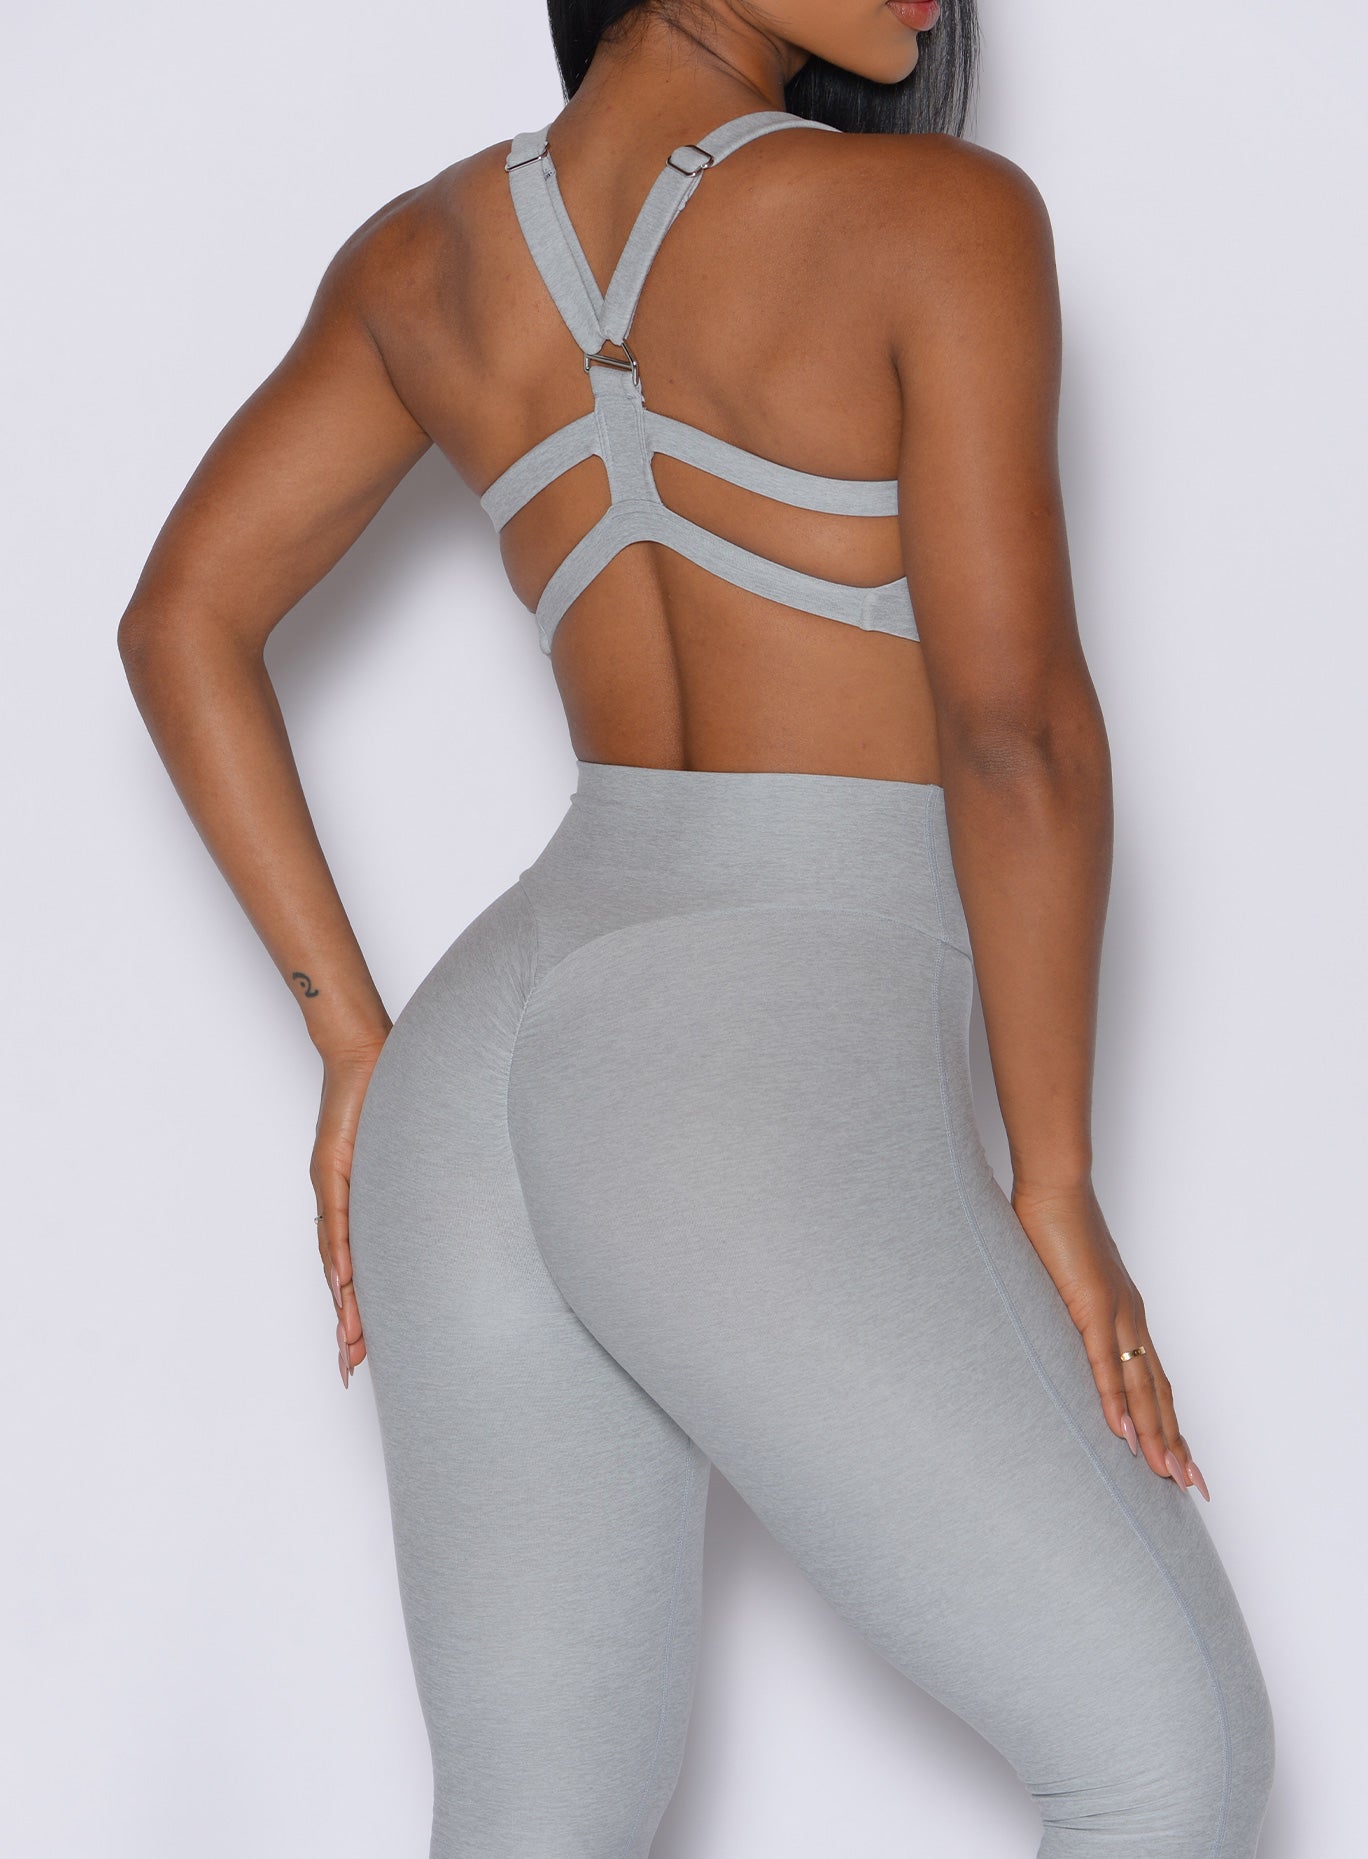 back profile view of a model wearing our core set bra in light cloud color along with the matching leggings